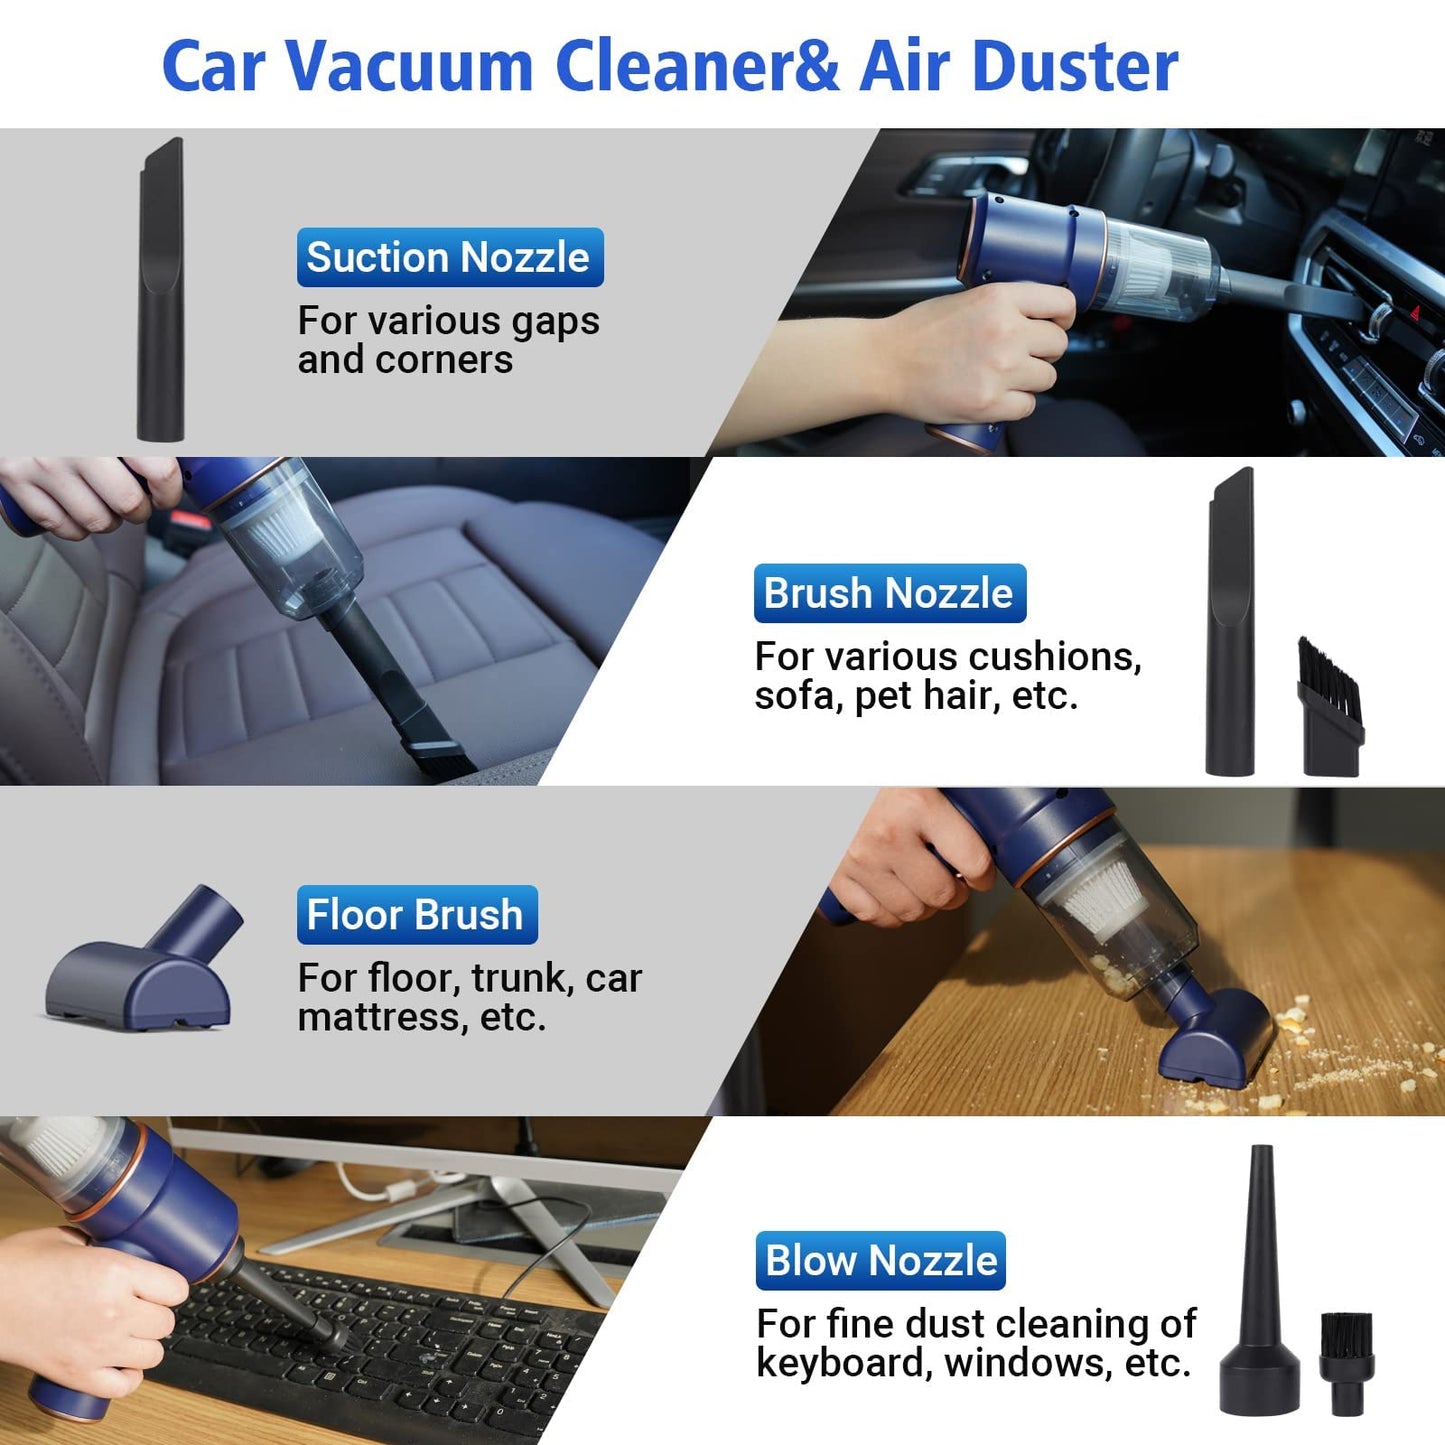 KASTWAVE Cordless Handheld Vacuum Cleaner - 2-in-1 Vacuum & Air Duster, 9000PA Suction, Wet/Dry Use, LED Light, Multi-Nozzles, Floor Brush - Perfect for Car, Home, Office, and Pet Hair